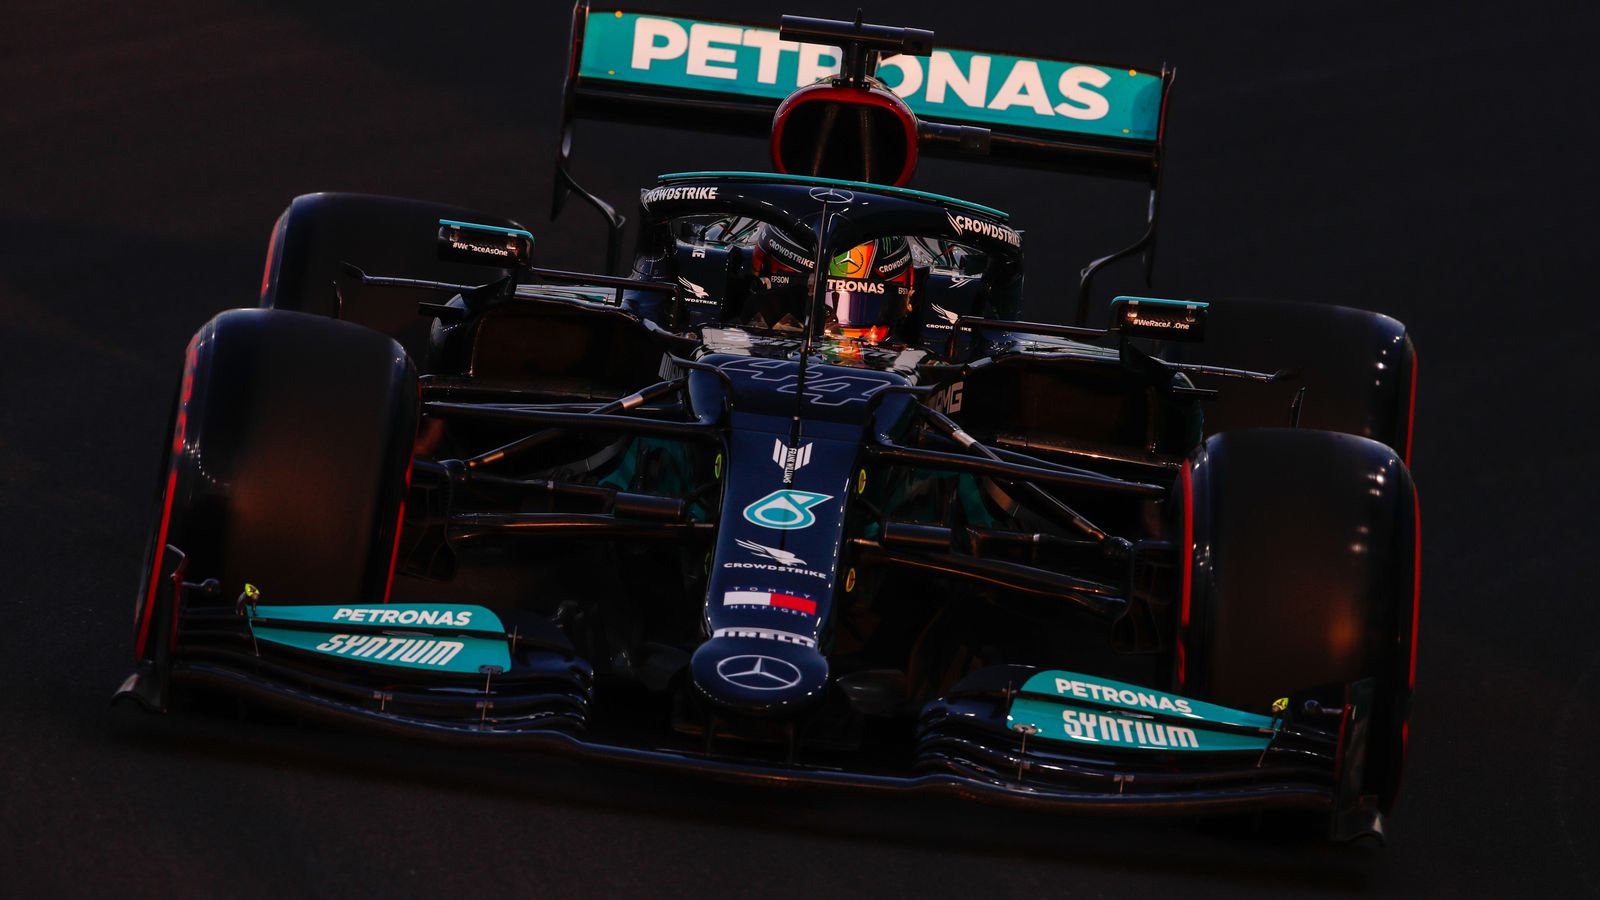 Saudi Arabian GP: Lewis Hamilton just ahead of Max Verstappen in first F1 Practice One at Jeddah